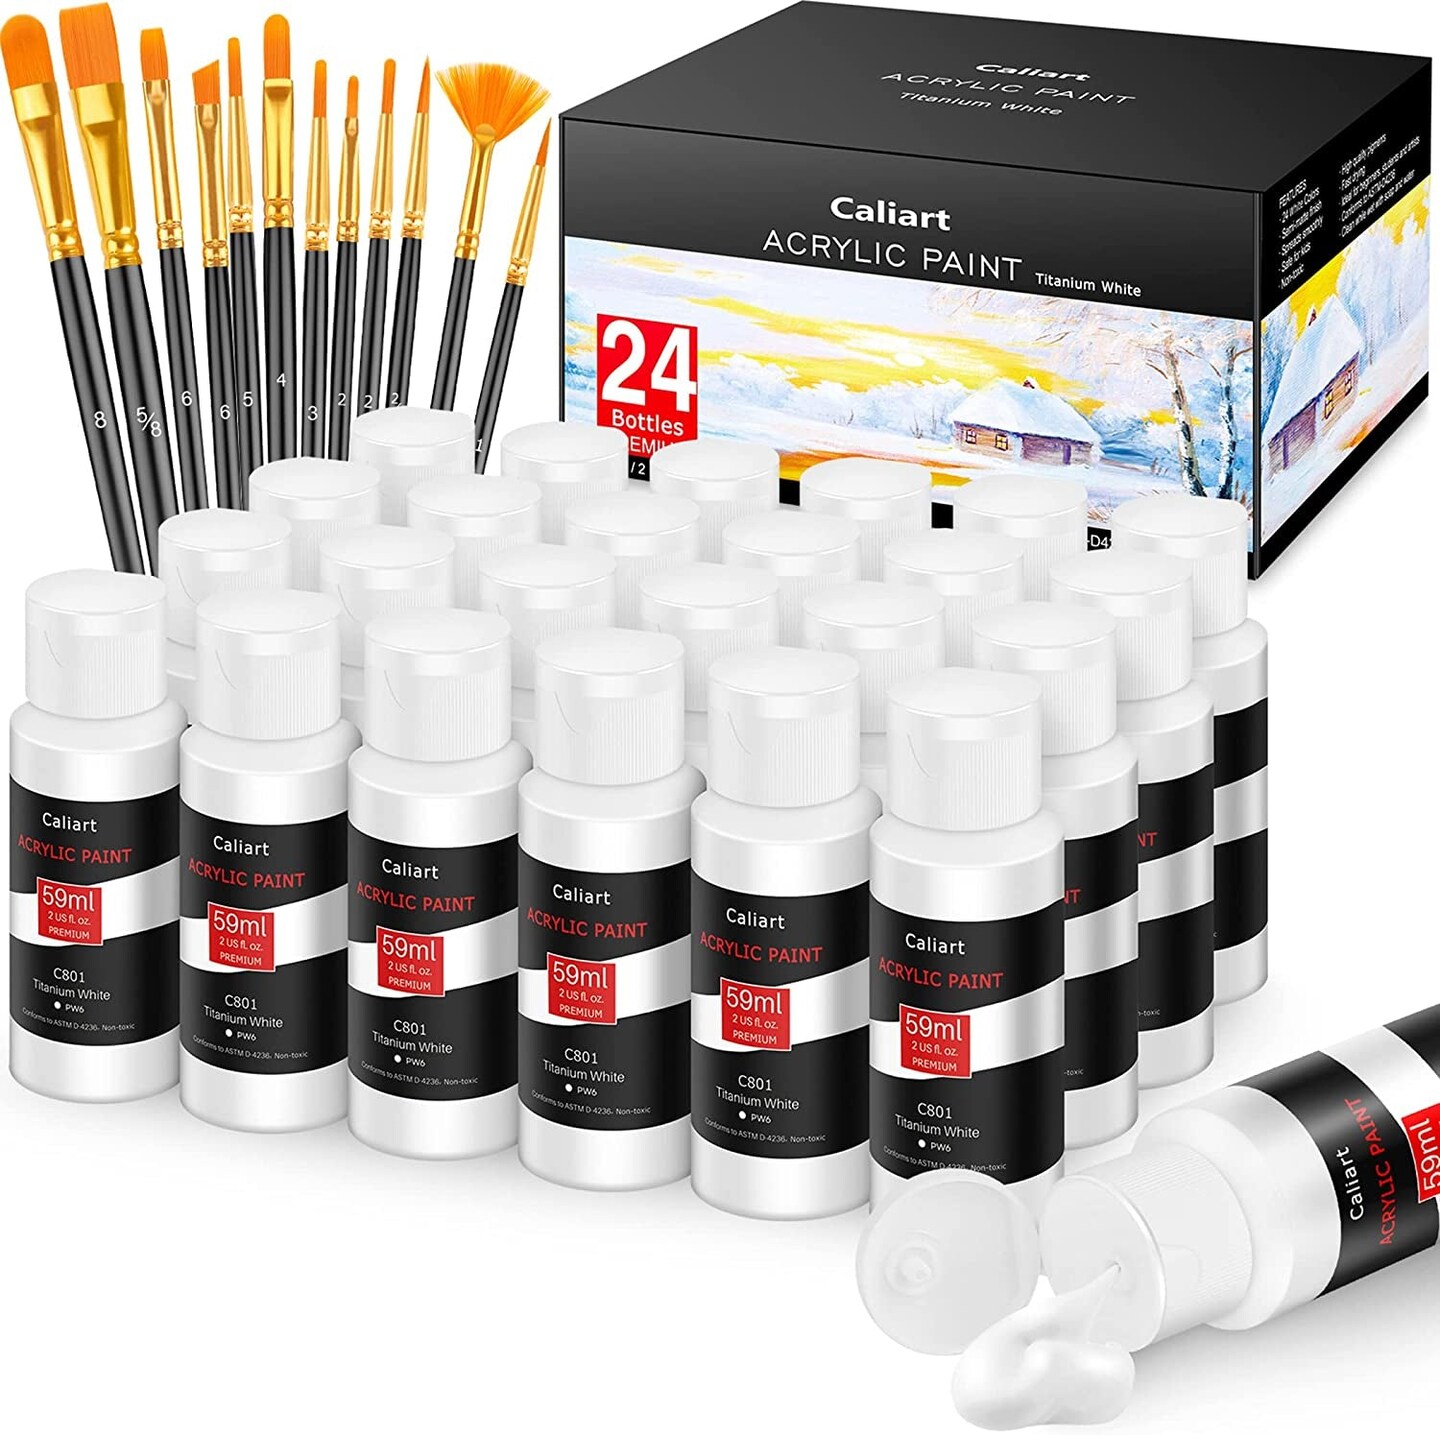 Caliart Pastel Acrylic Paint Set with 12 Brushes, 24 Pastel Colors (59ml,  2oz) Art Craft Paint for Artists Students Kids Beginners, Halloween  Decorations Canvas Ceramic Wood Rock Painting Supplies Kit